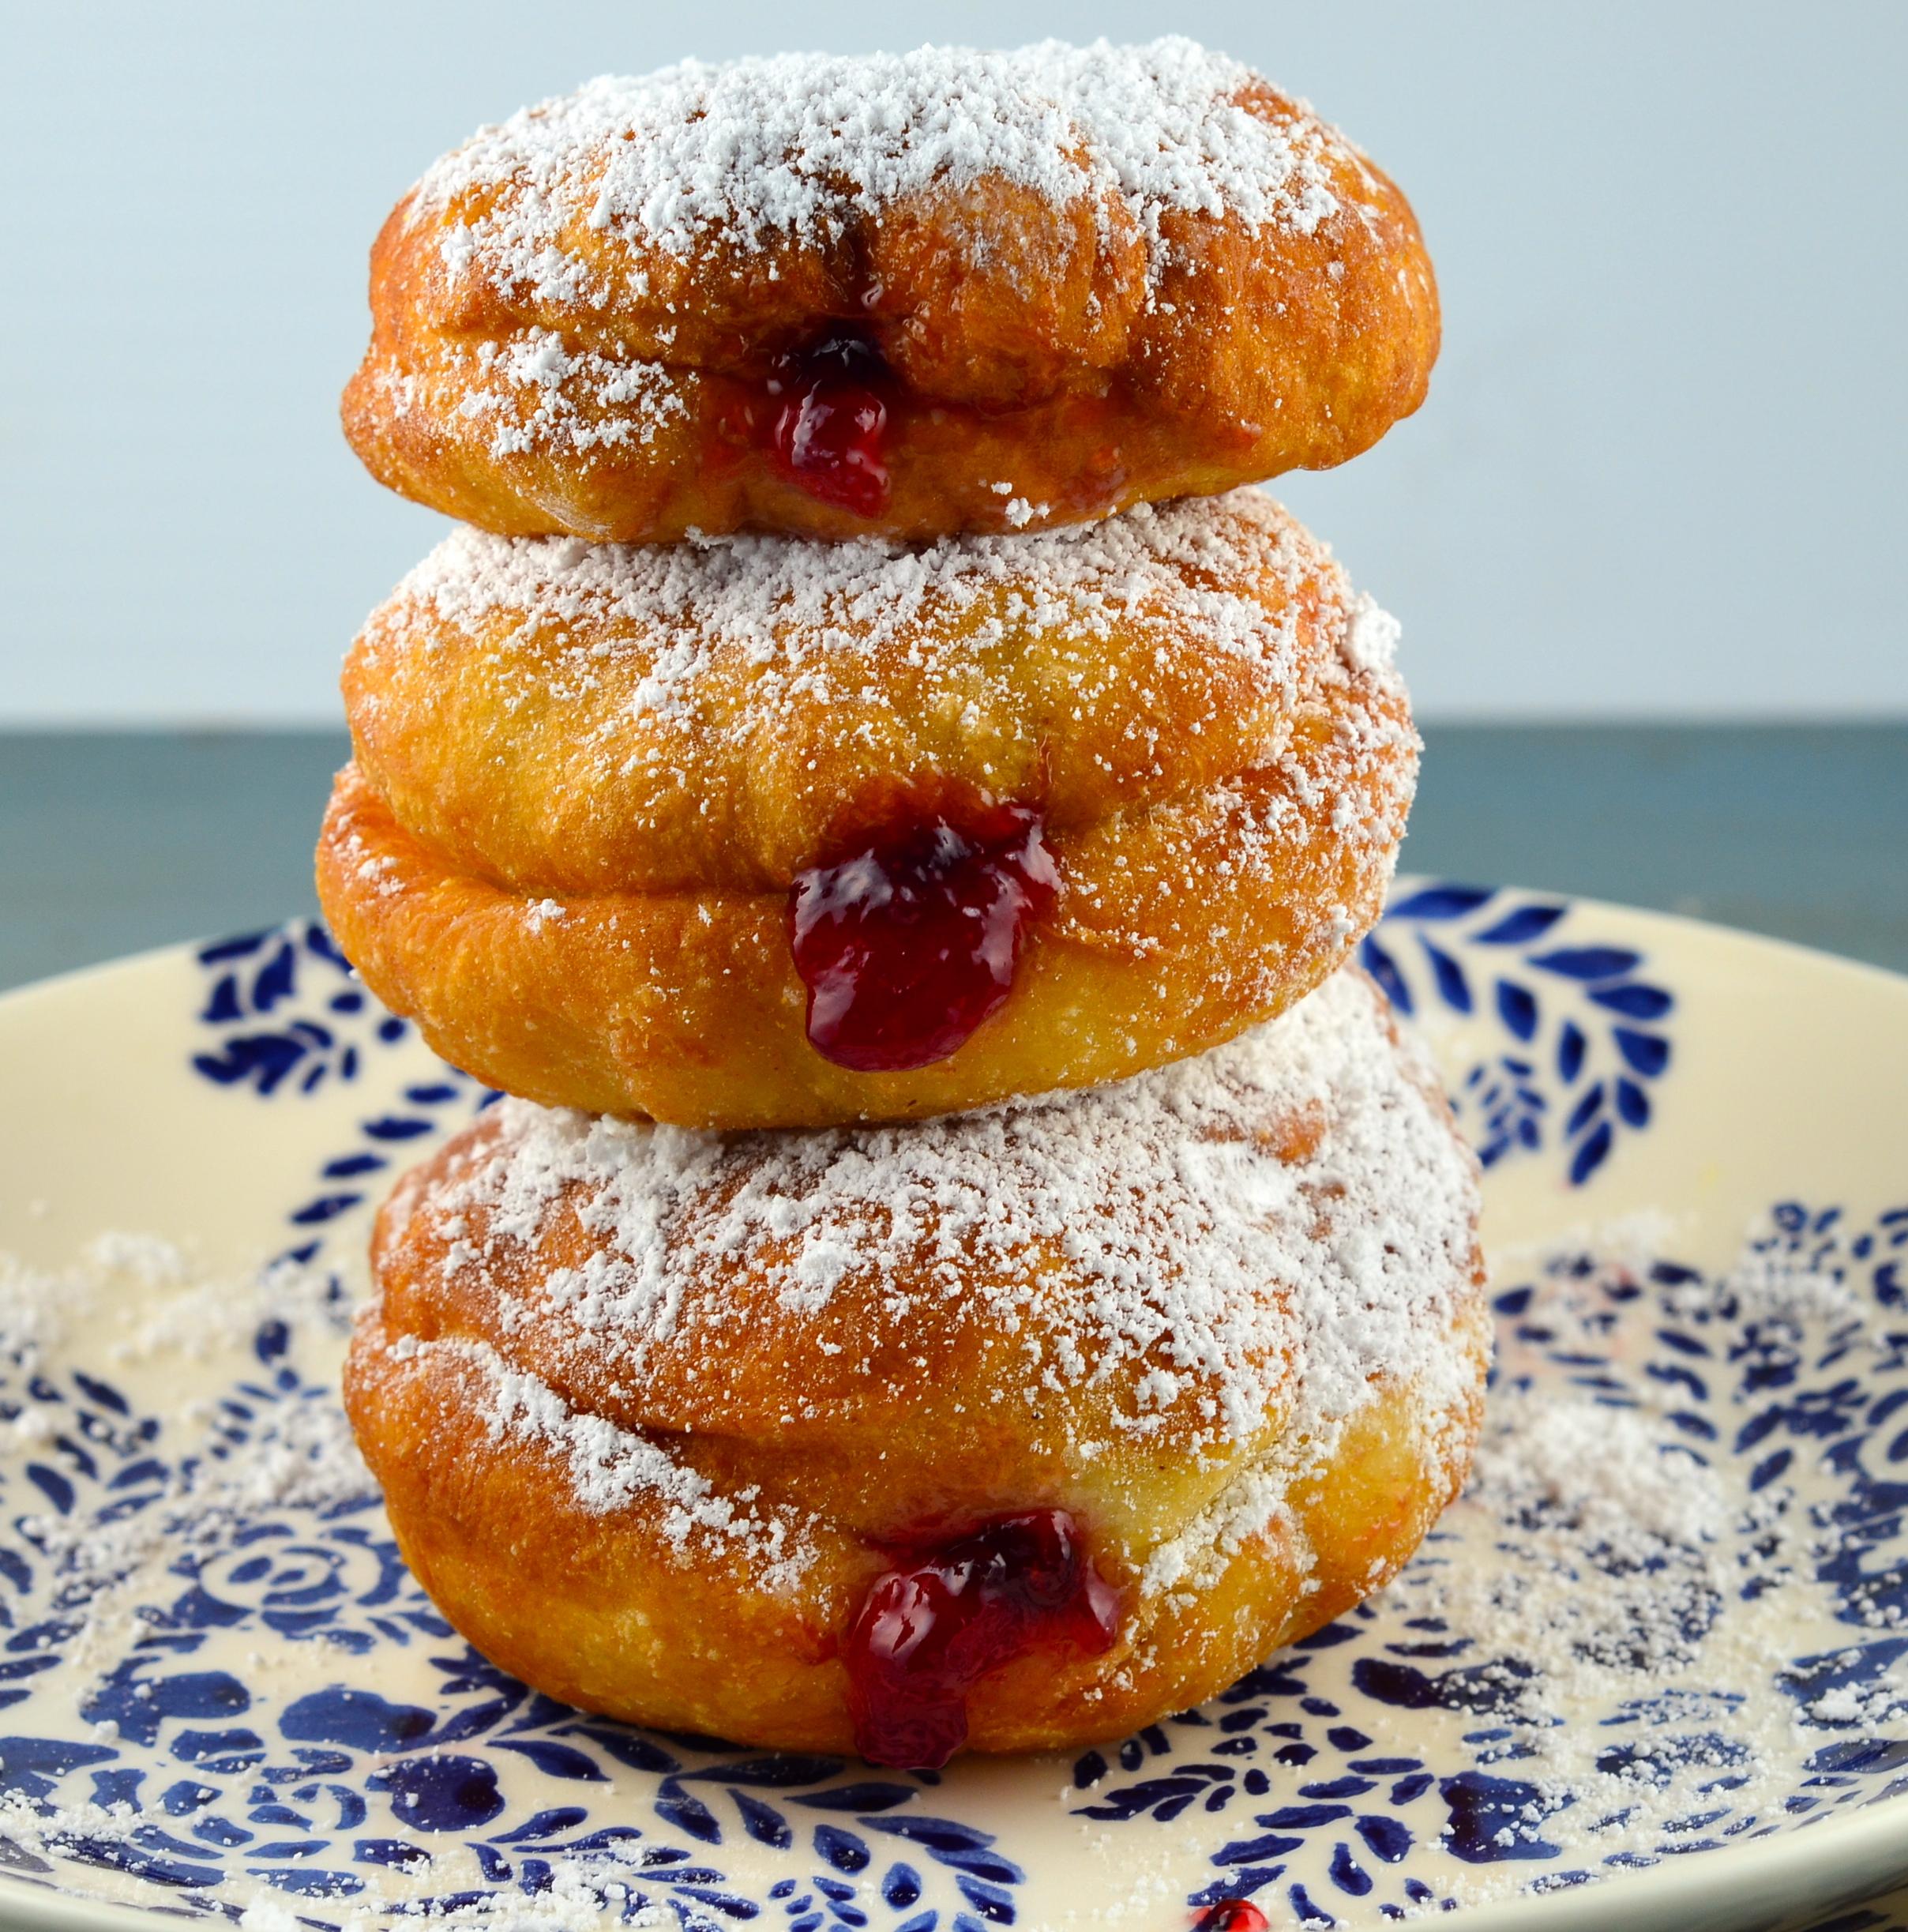  Forget store-bought doughnuts - these homemade sufganiyot are worth every minute in the kitchen!